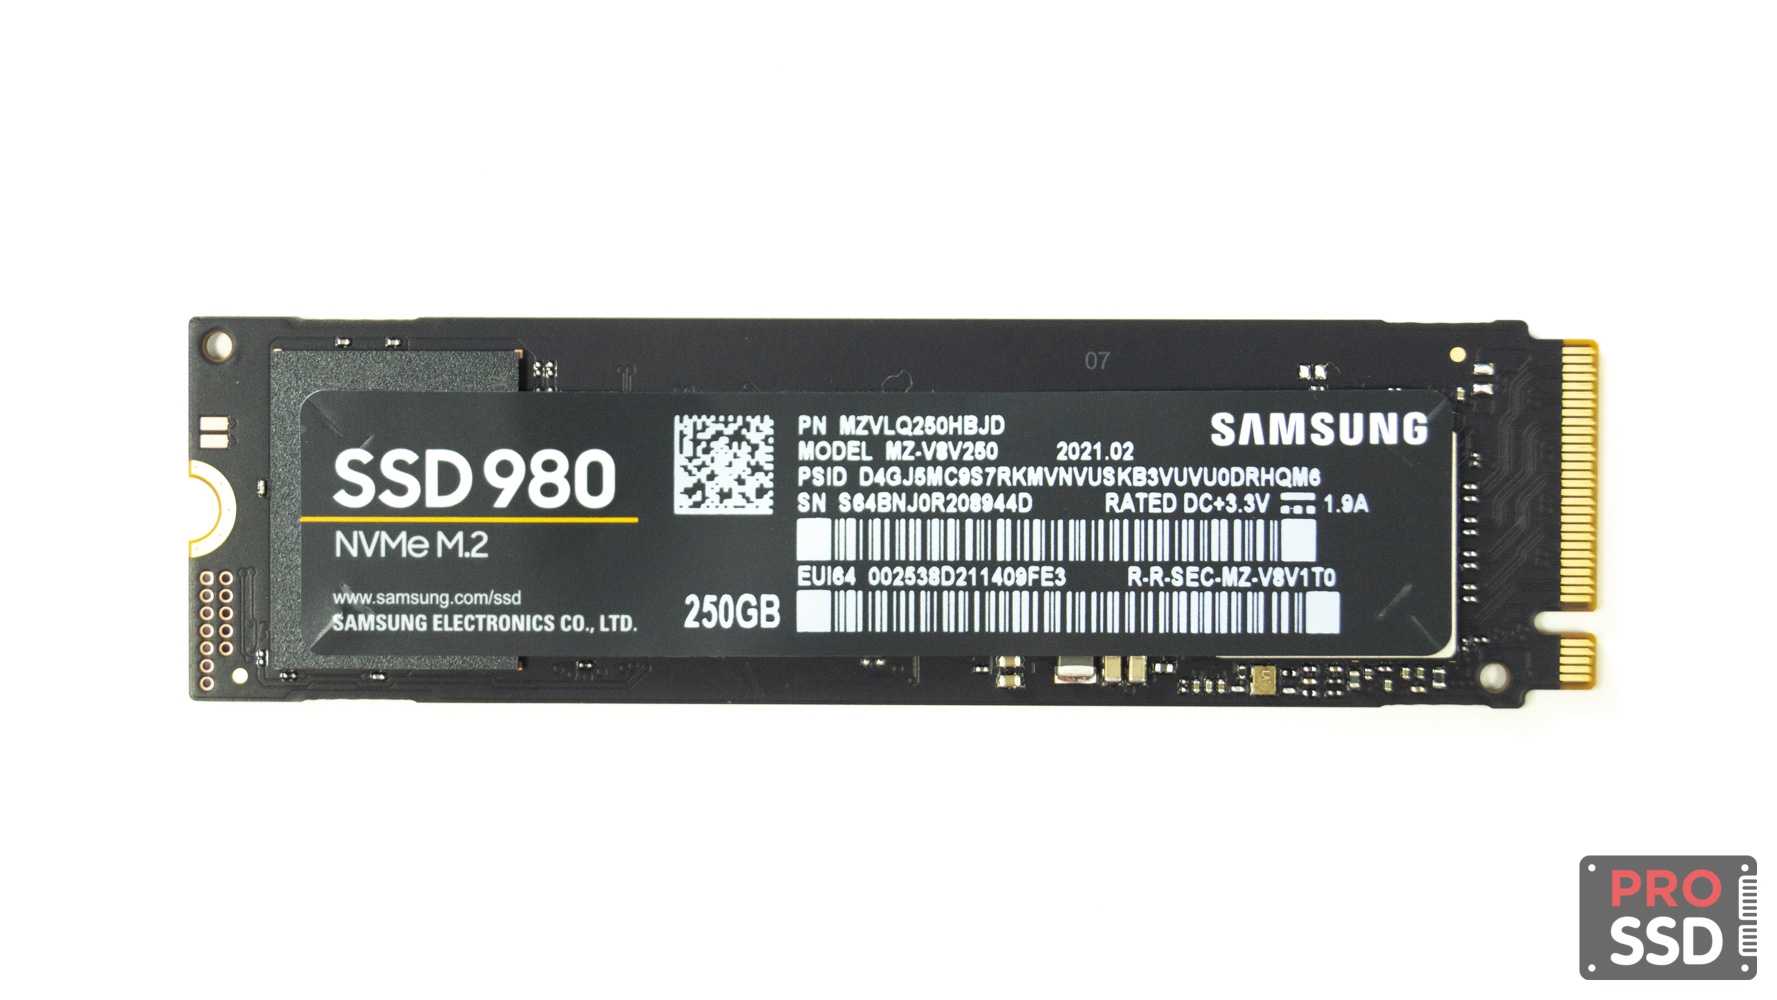 Samsung 980 ssd review: loses the dram but not the performance | windows central